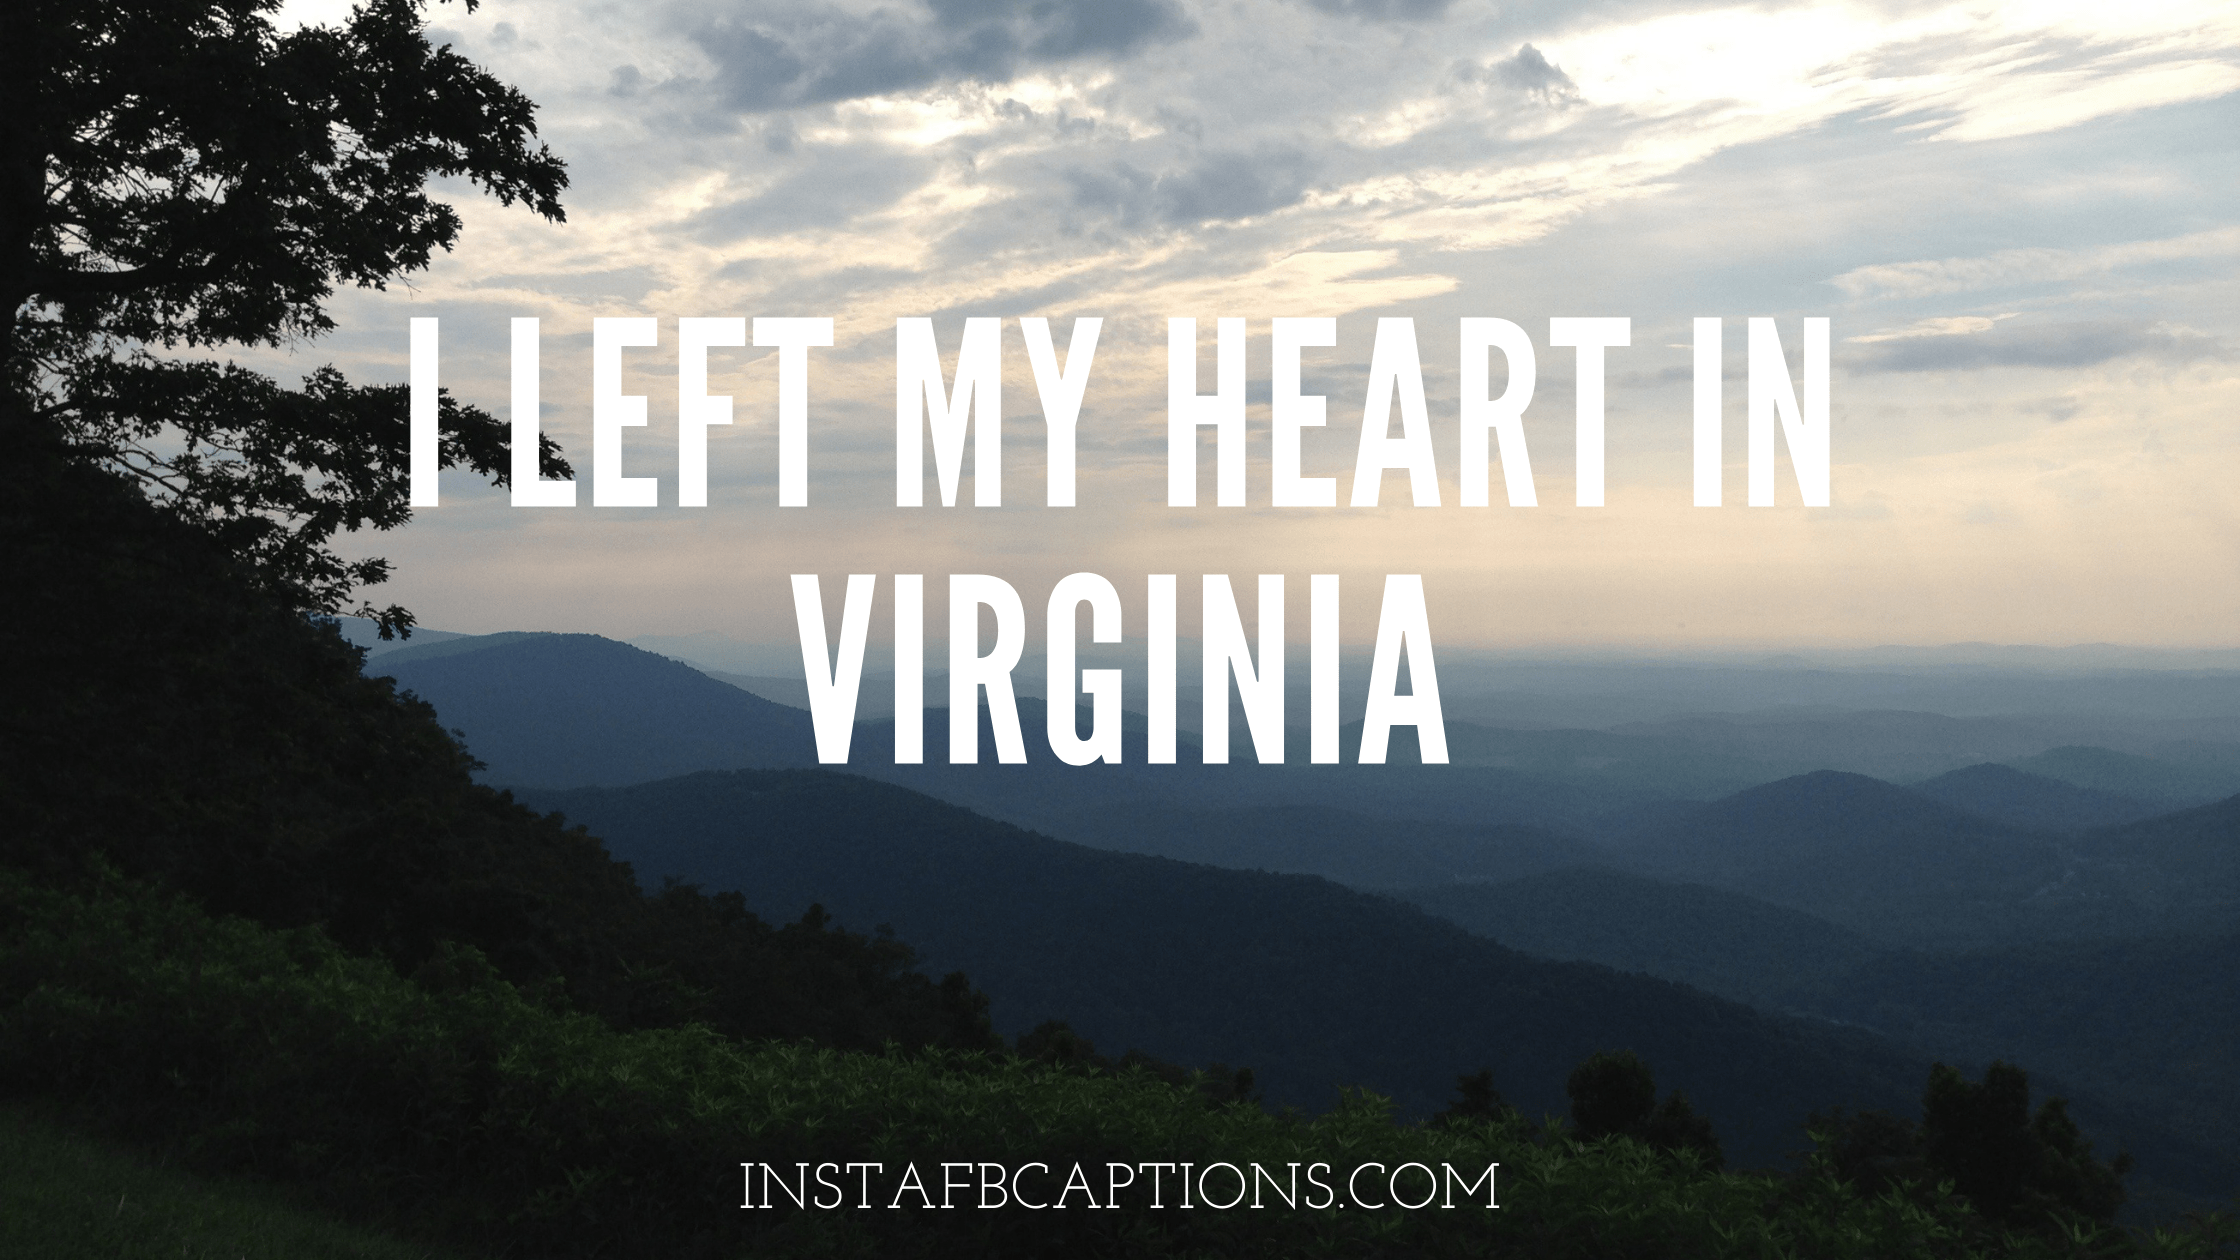 Astonishing Virginia Instagram Captions  - Astonishing Virginia Instagram Captions - Virginia Instagram Captions for Beach and Tech in 2022